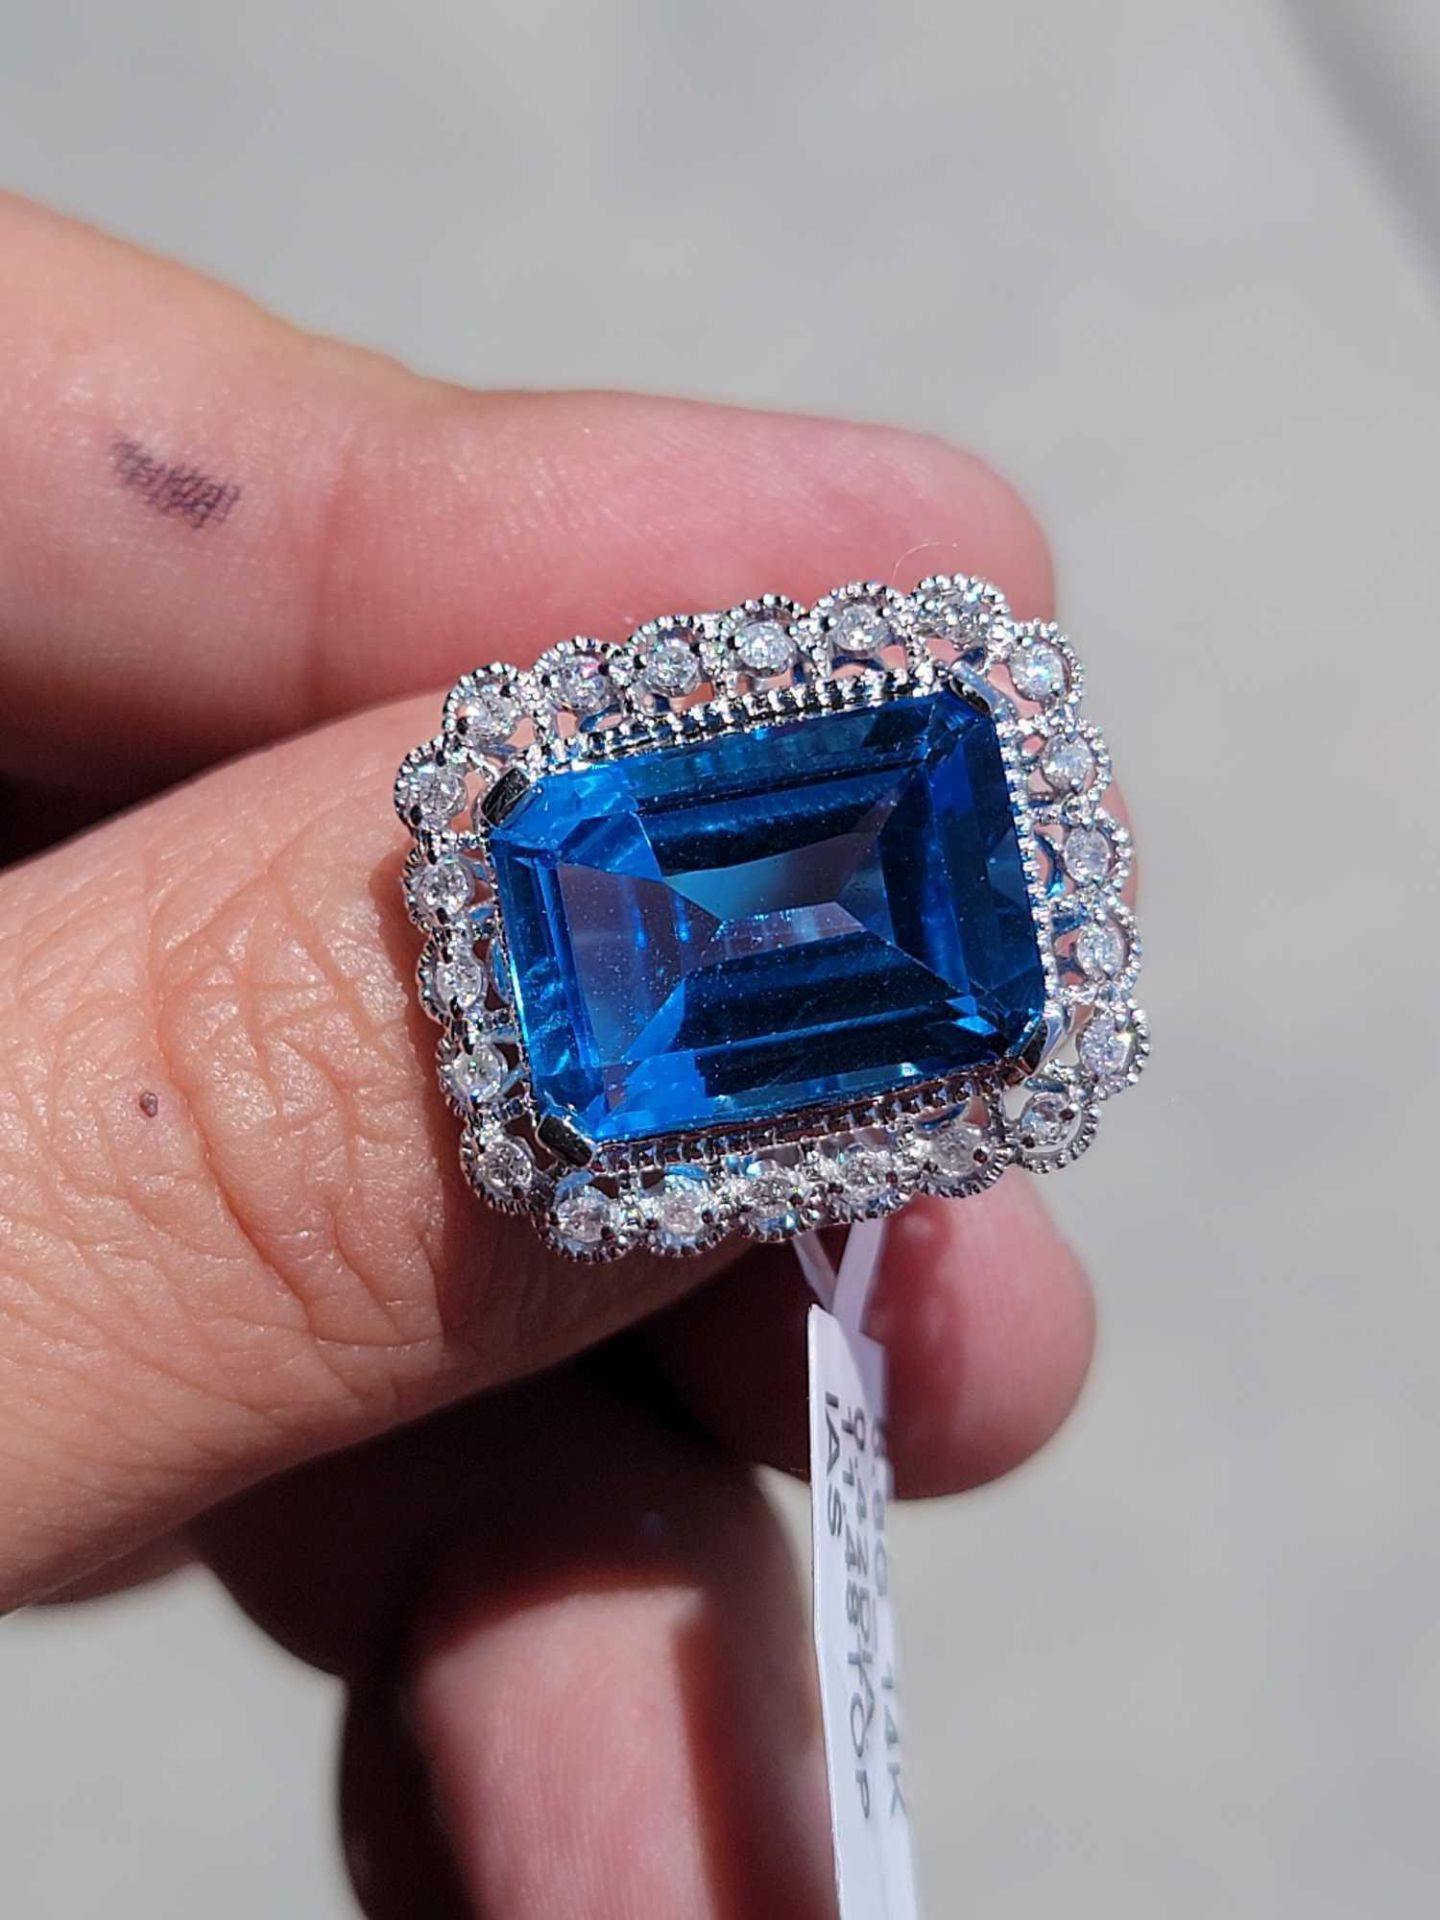 14KT Diamond and Blue Topaz Ring - Image 4 of 8